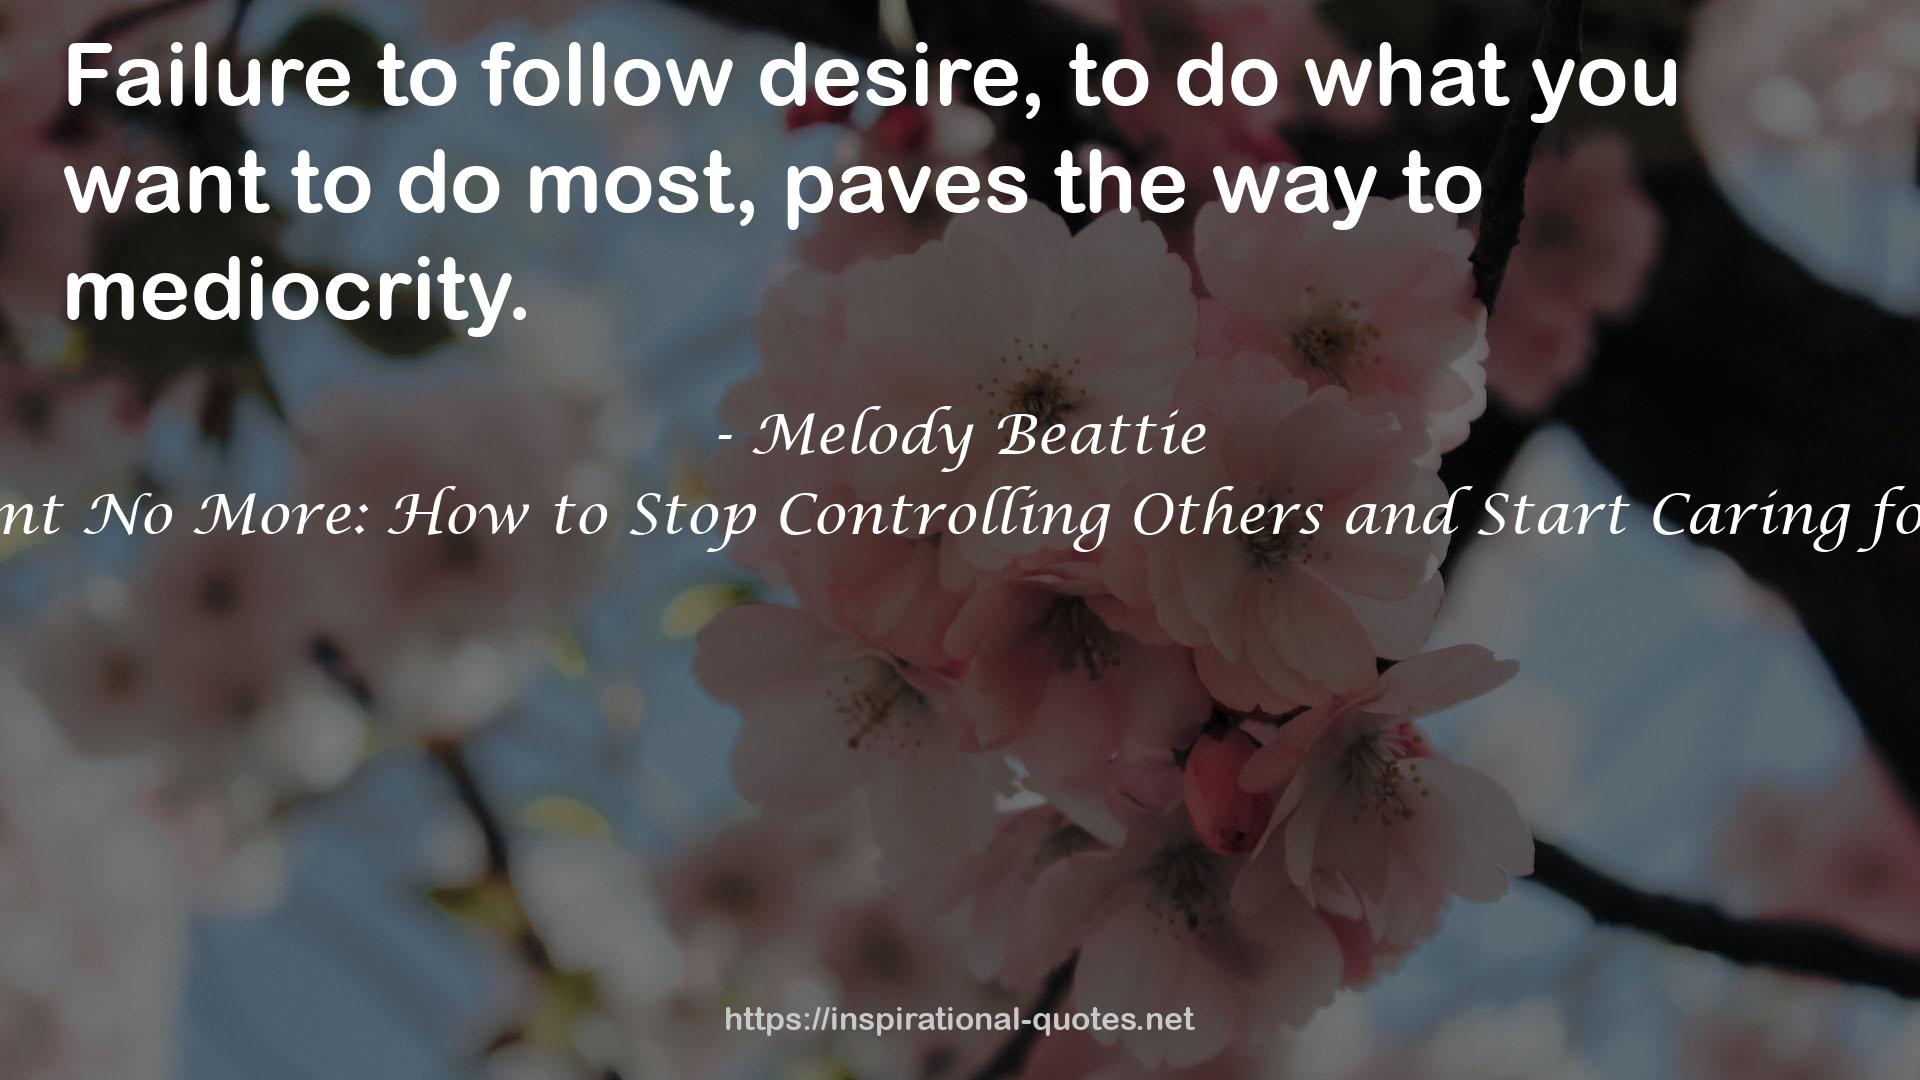 Melody Beattie QUOTES